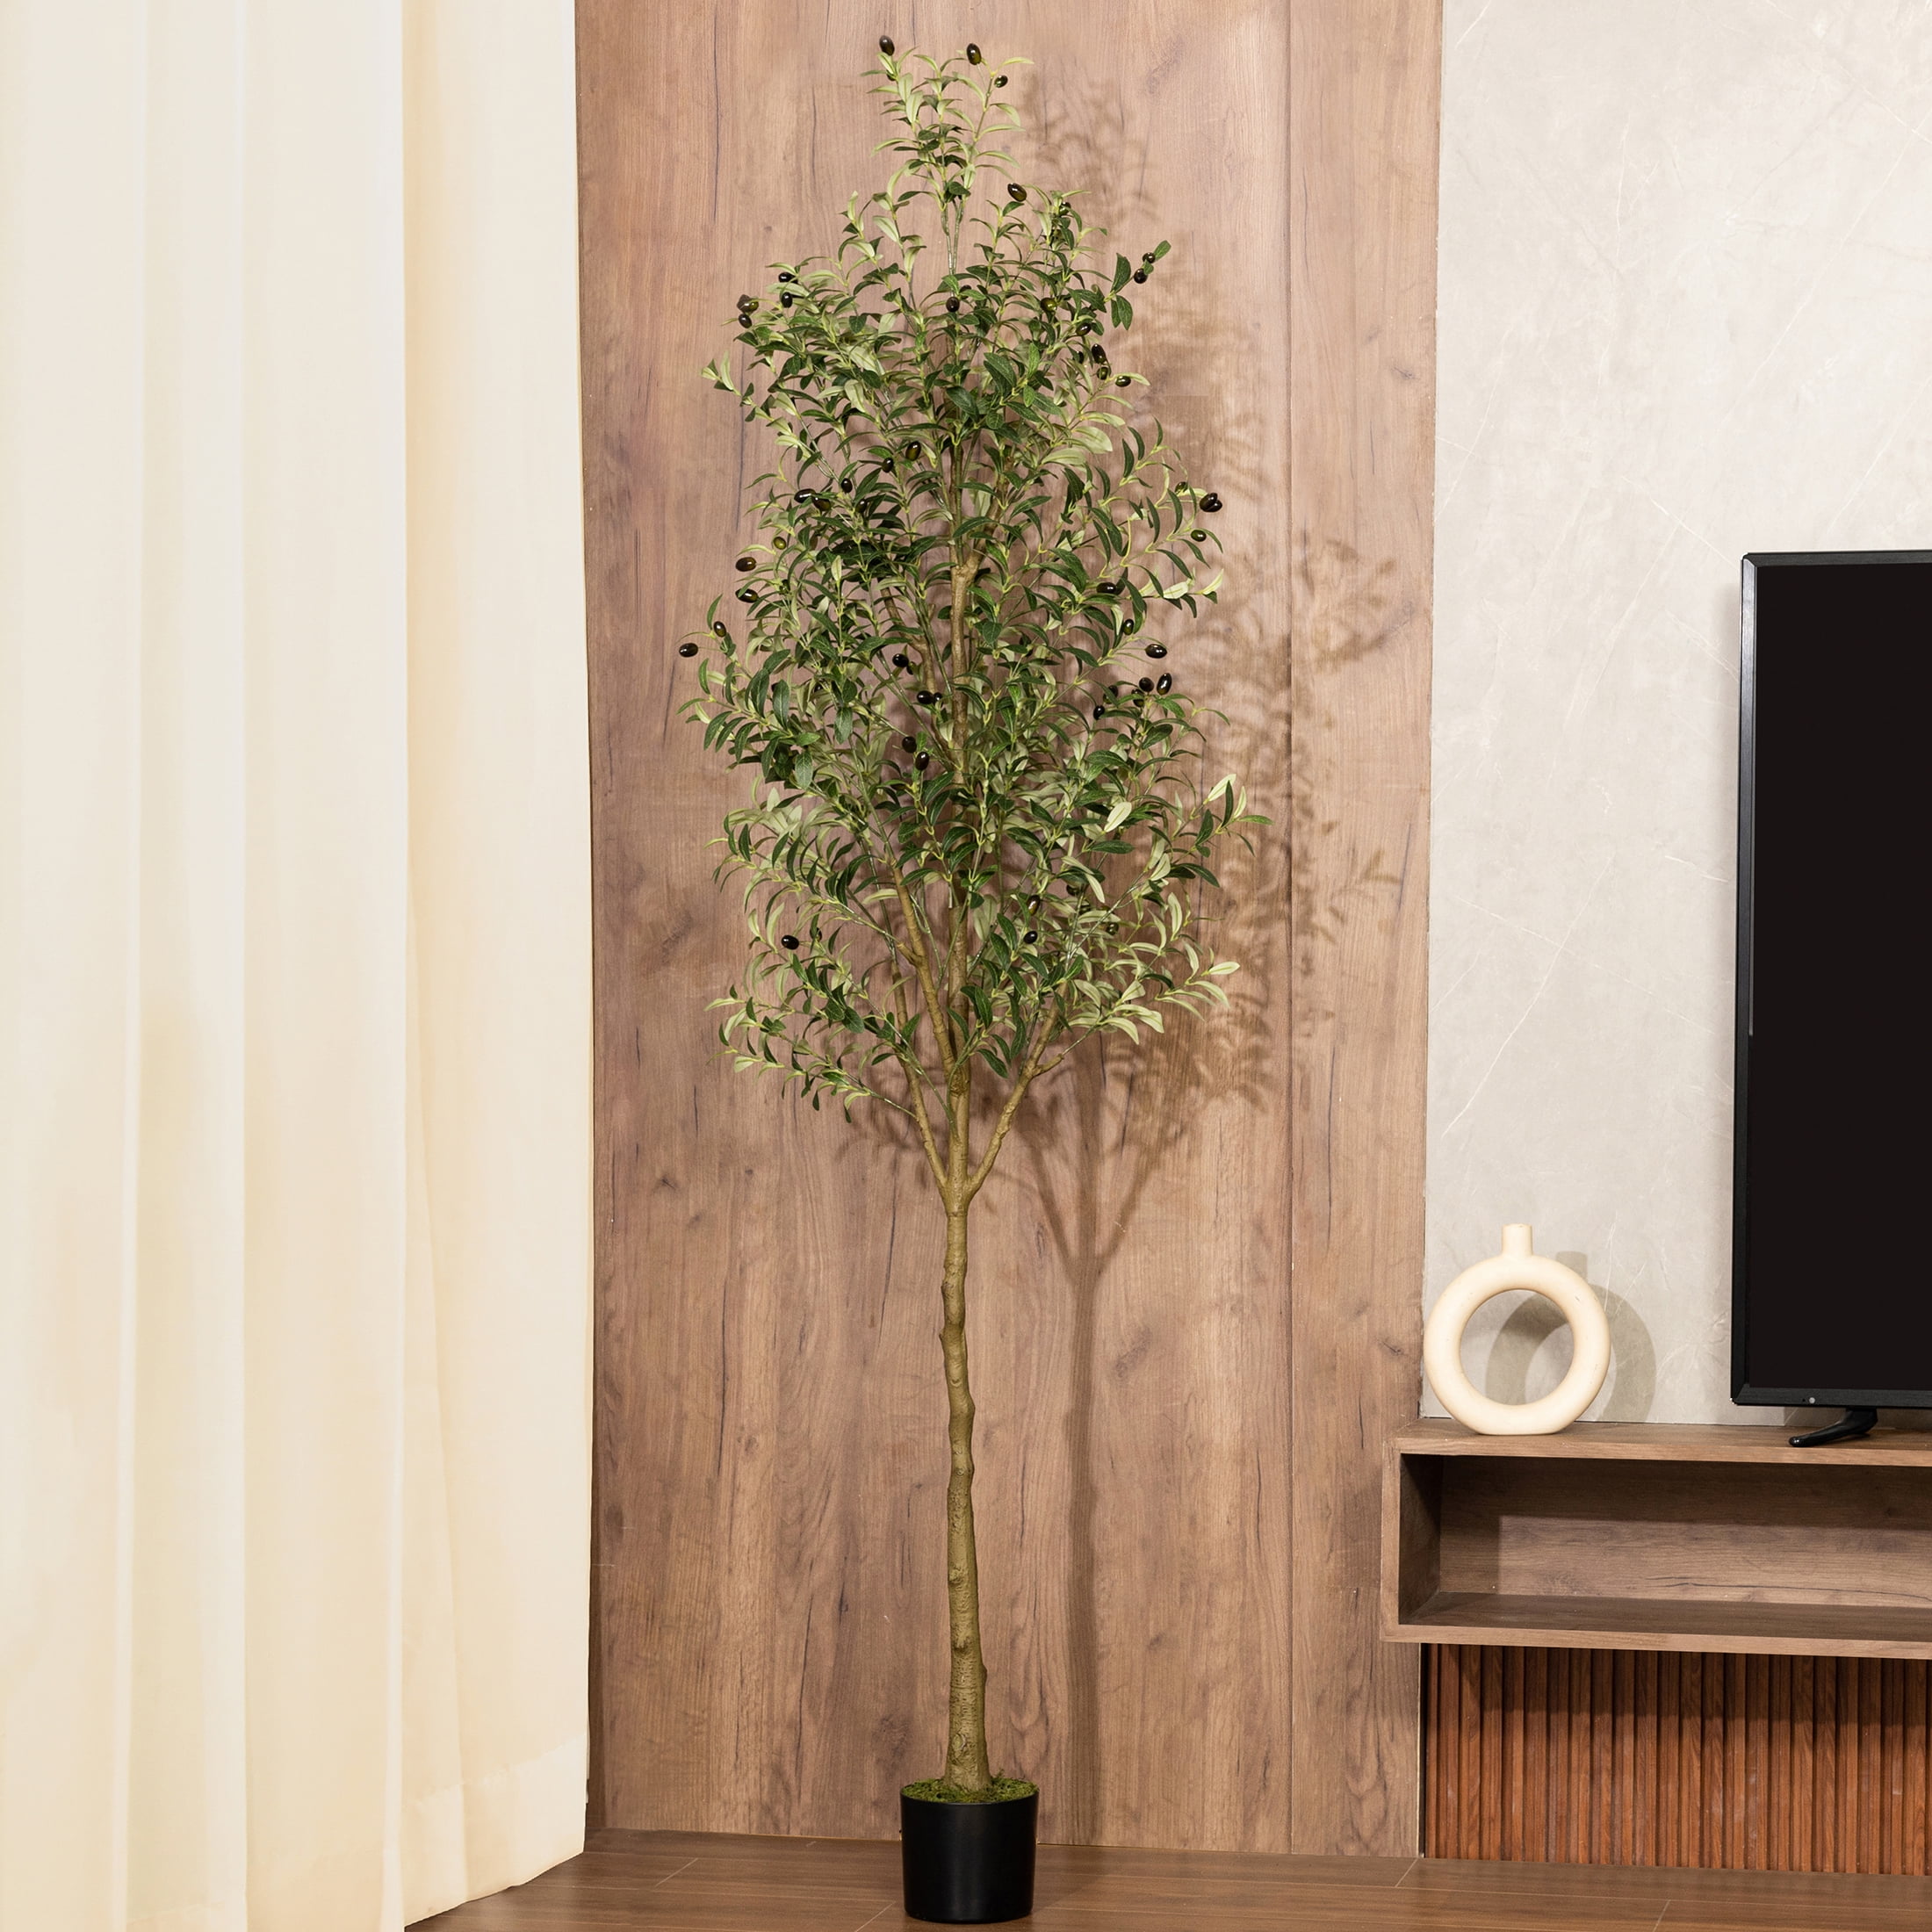 Kazeila Artificial Olive Tree 6FT Tall Faux Silk Plant for Home Office  Decor Indoor Fake Potted Tree with Natural Wood Trunk and Lifelike Fruits